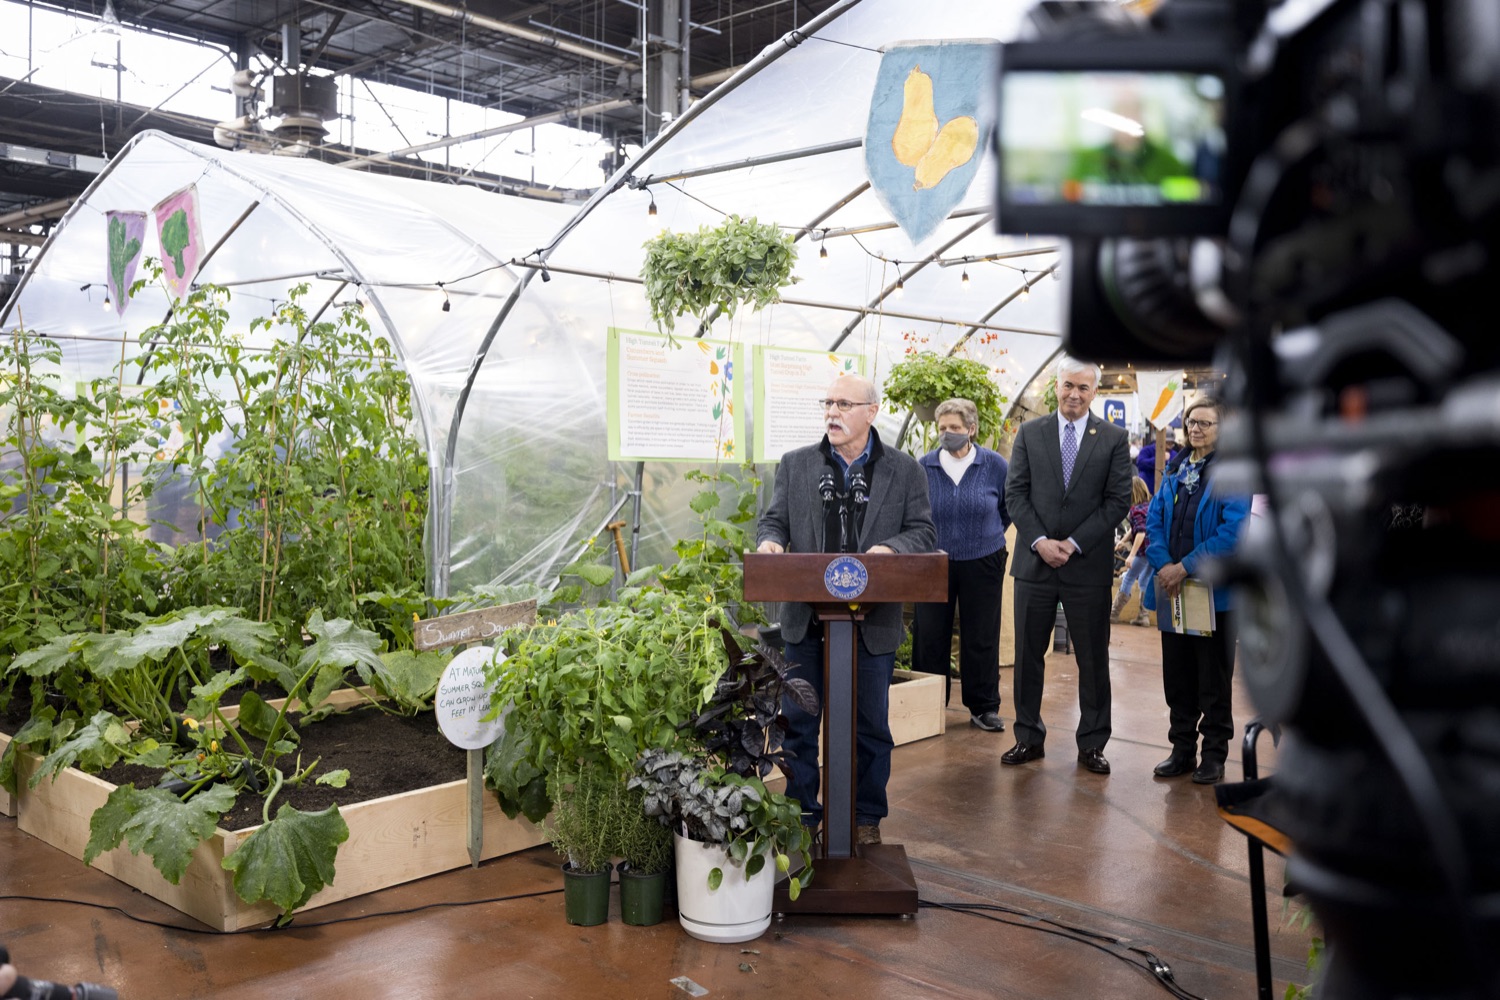 Jeff Moyer, CEO of Rodale Institute, celebrates the Wolf Administrations targeted investments to grow market opportunities for Pennsylvania farmers, including the PA Farm Bill funded PA Preferred® Organic Initiative, in Harrisburg, PA on January 13, 2023.<br><a href="https://filesource.amperwave.net/commonwealthofpa/photo/22478_ag_organic_capstone_07.jpg" target="_blank">⇣ Download Photo</a>